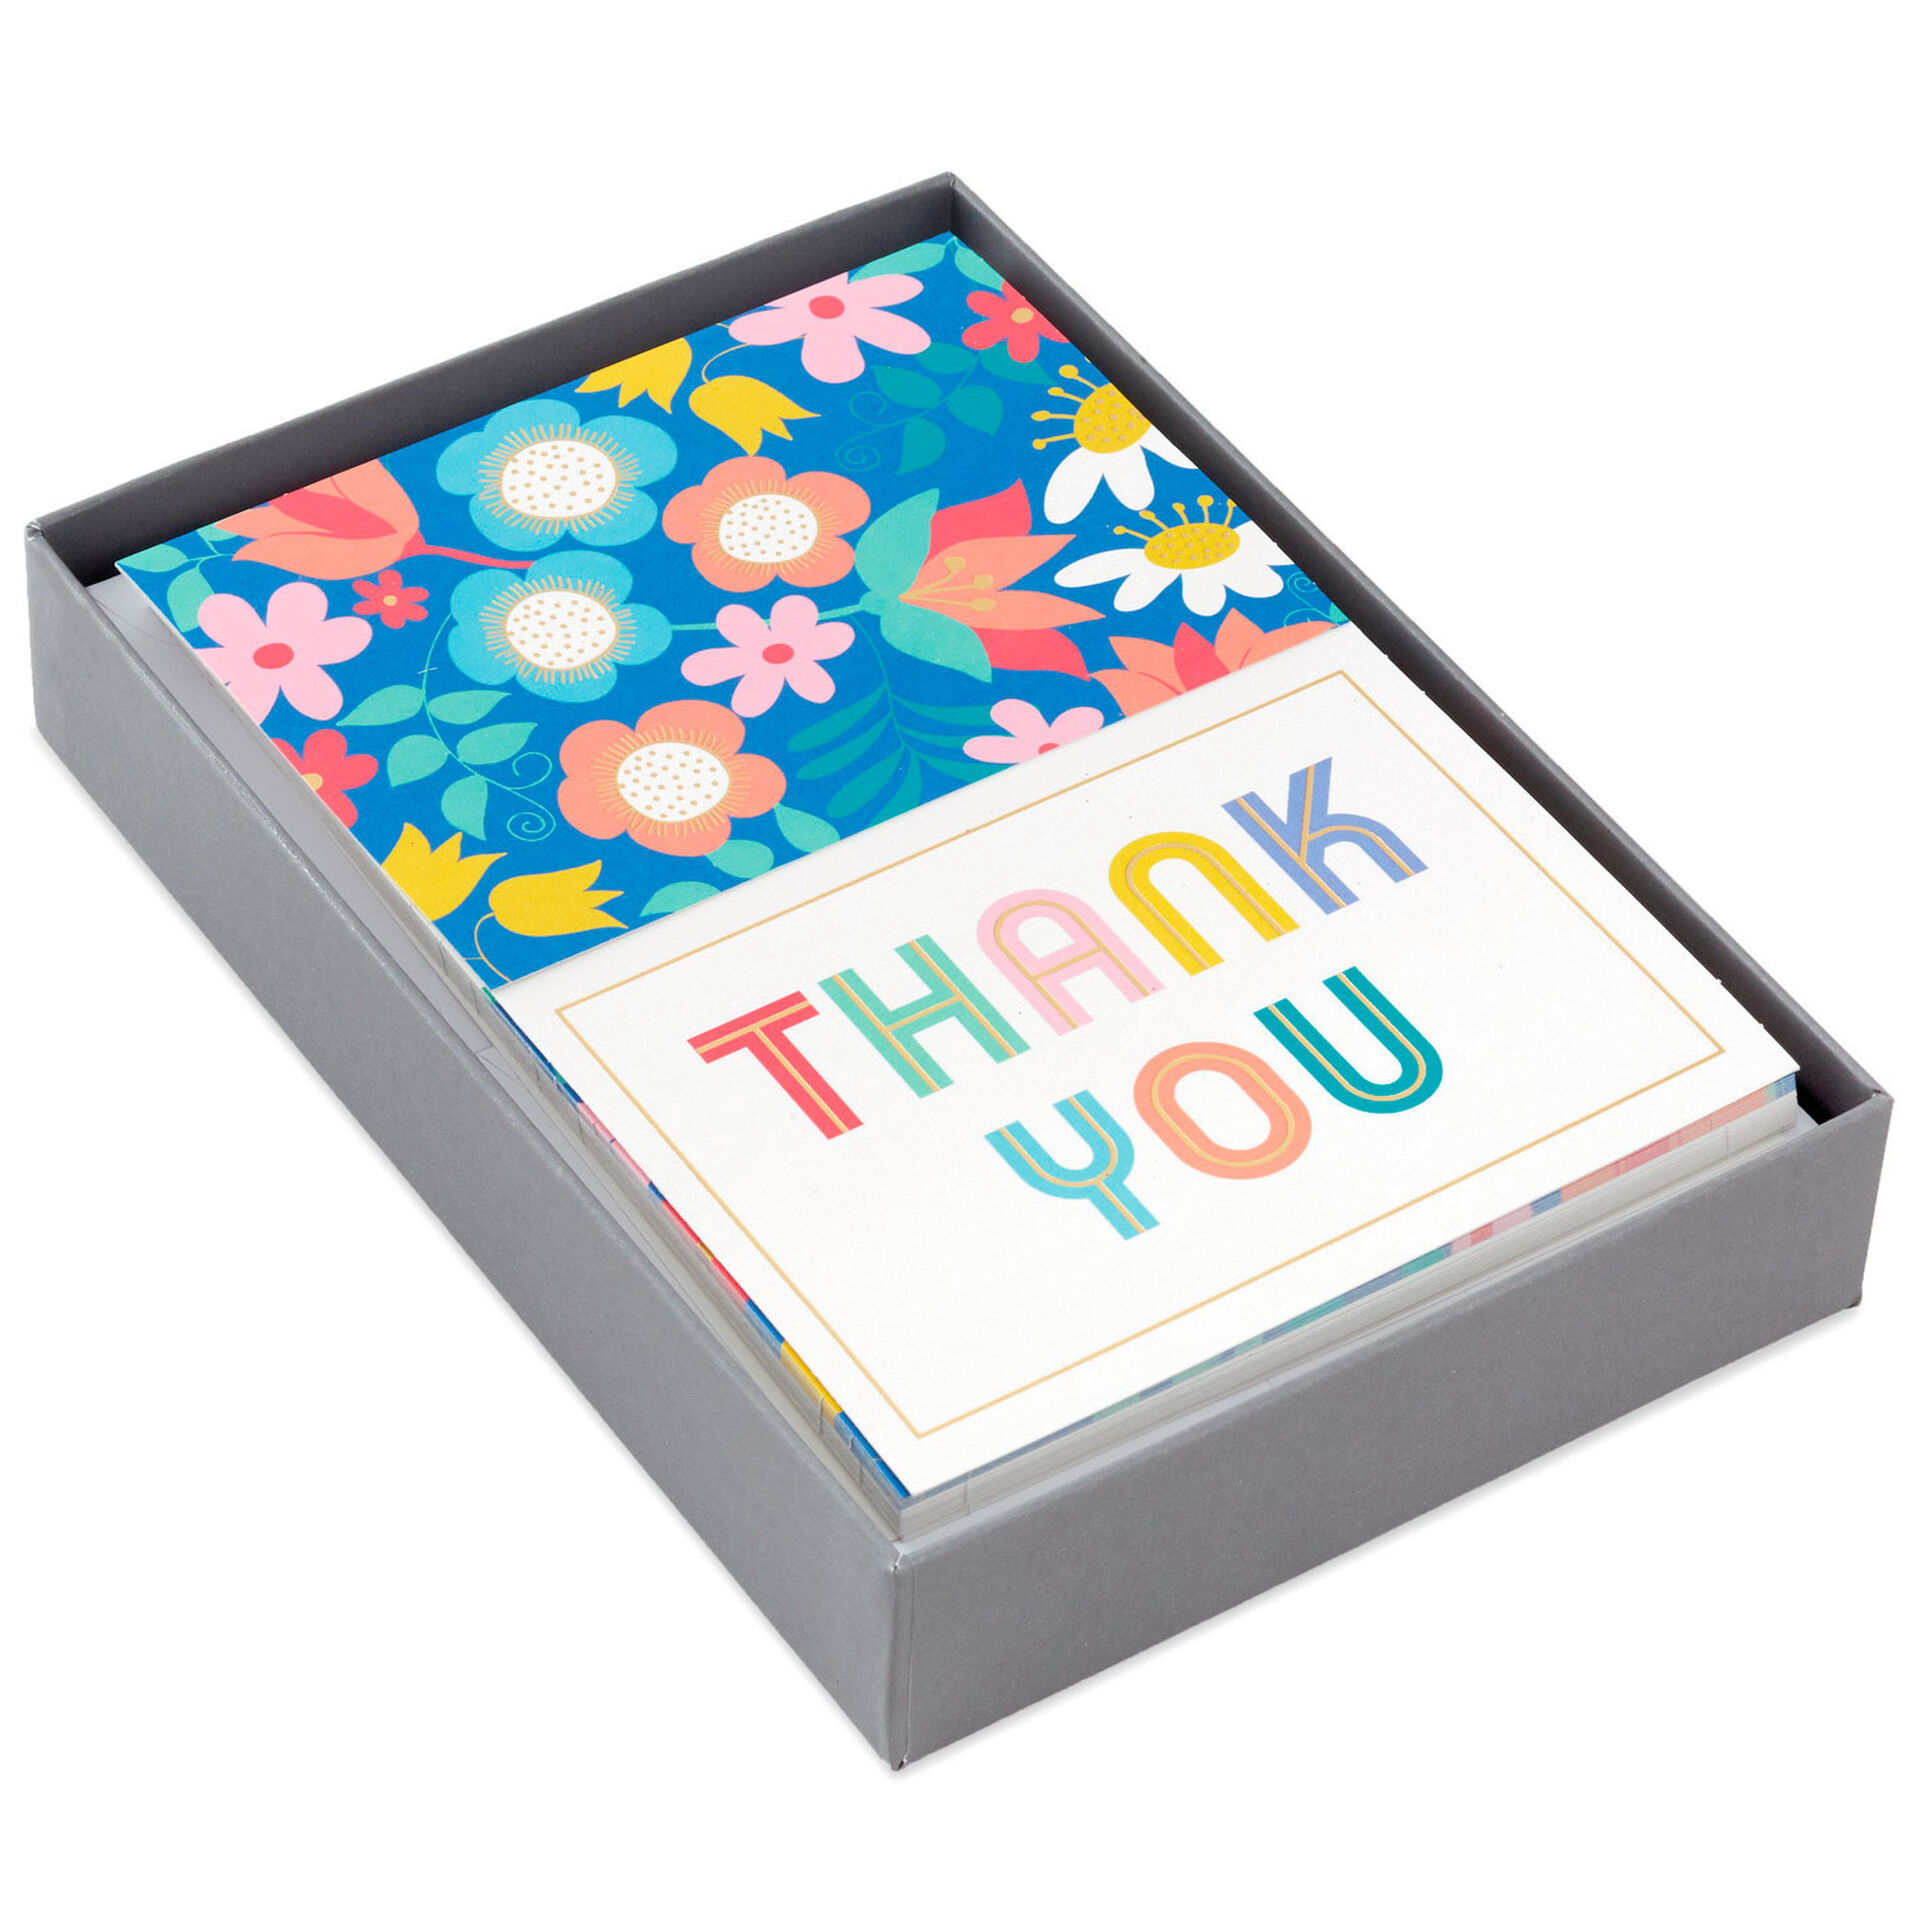 Floral-and-Lettering-Bulk-Blank-Note-Cards-Assortment_1399WTU1087_01